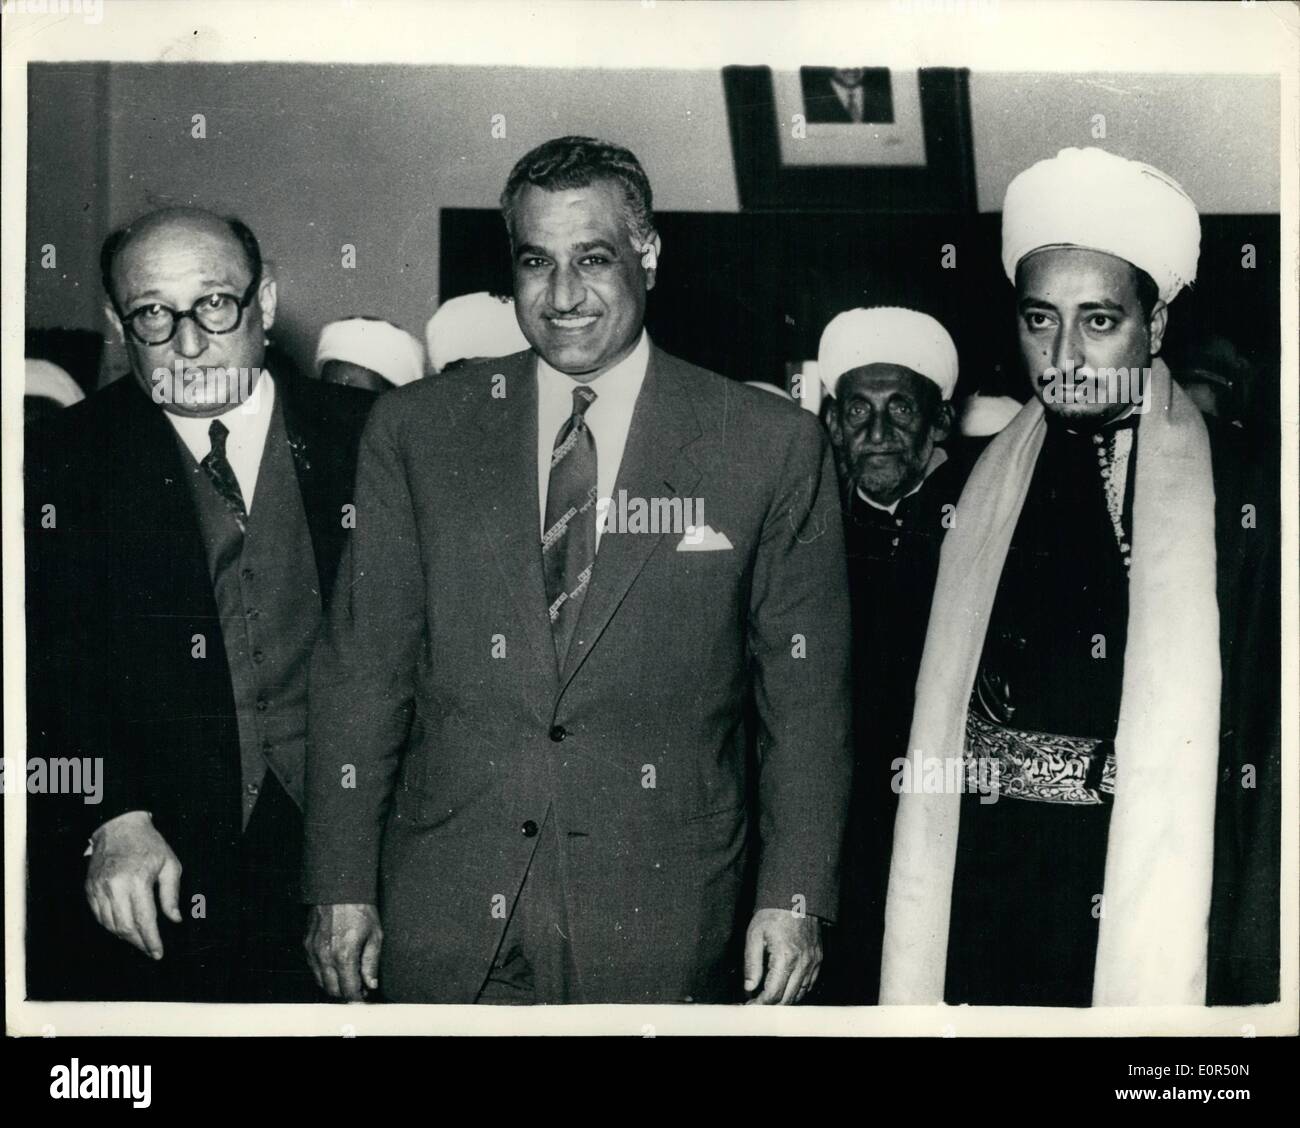 Mar. 03, 1958 - Yemeni Prince meets President Nasser - in Damascus.: President Nasser of Egypt - met Syrian leaders at the Guest Palace in Damascus - during his recent visit in connection with the unity of Syria with Egypt. Photo shows President Nasser with Emir Seif El Islam Mohame El Badr at the guest Palace in Damascus. On the left is El Sayed Sabry El Assaly the Syriaan Prime Minister. Stock Photo